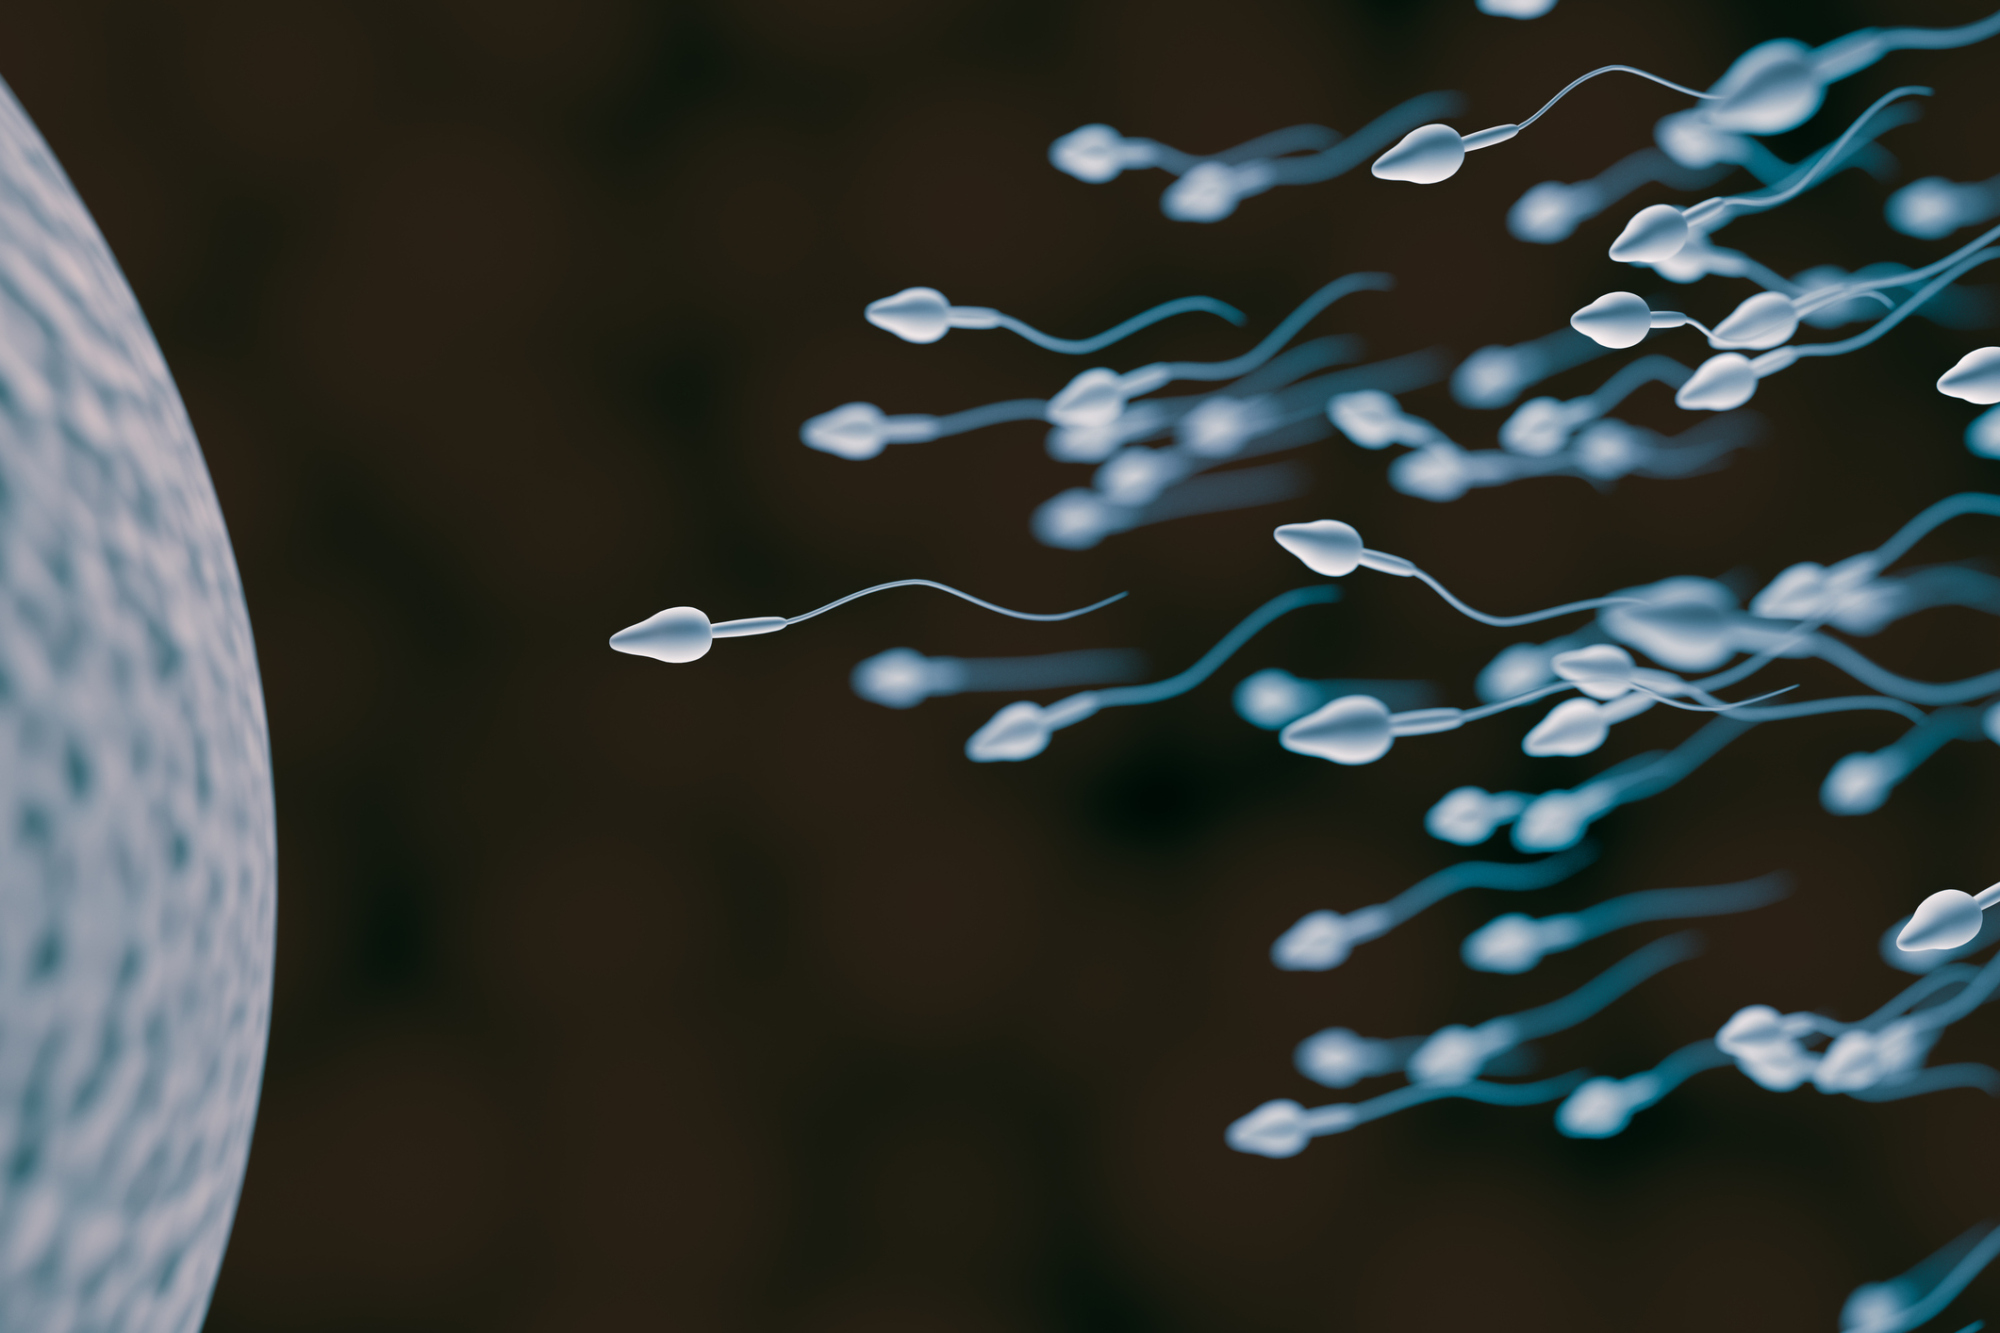 Research overseas has shown that semen quality has declined over the last several decades. | ISTOCK